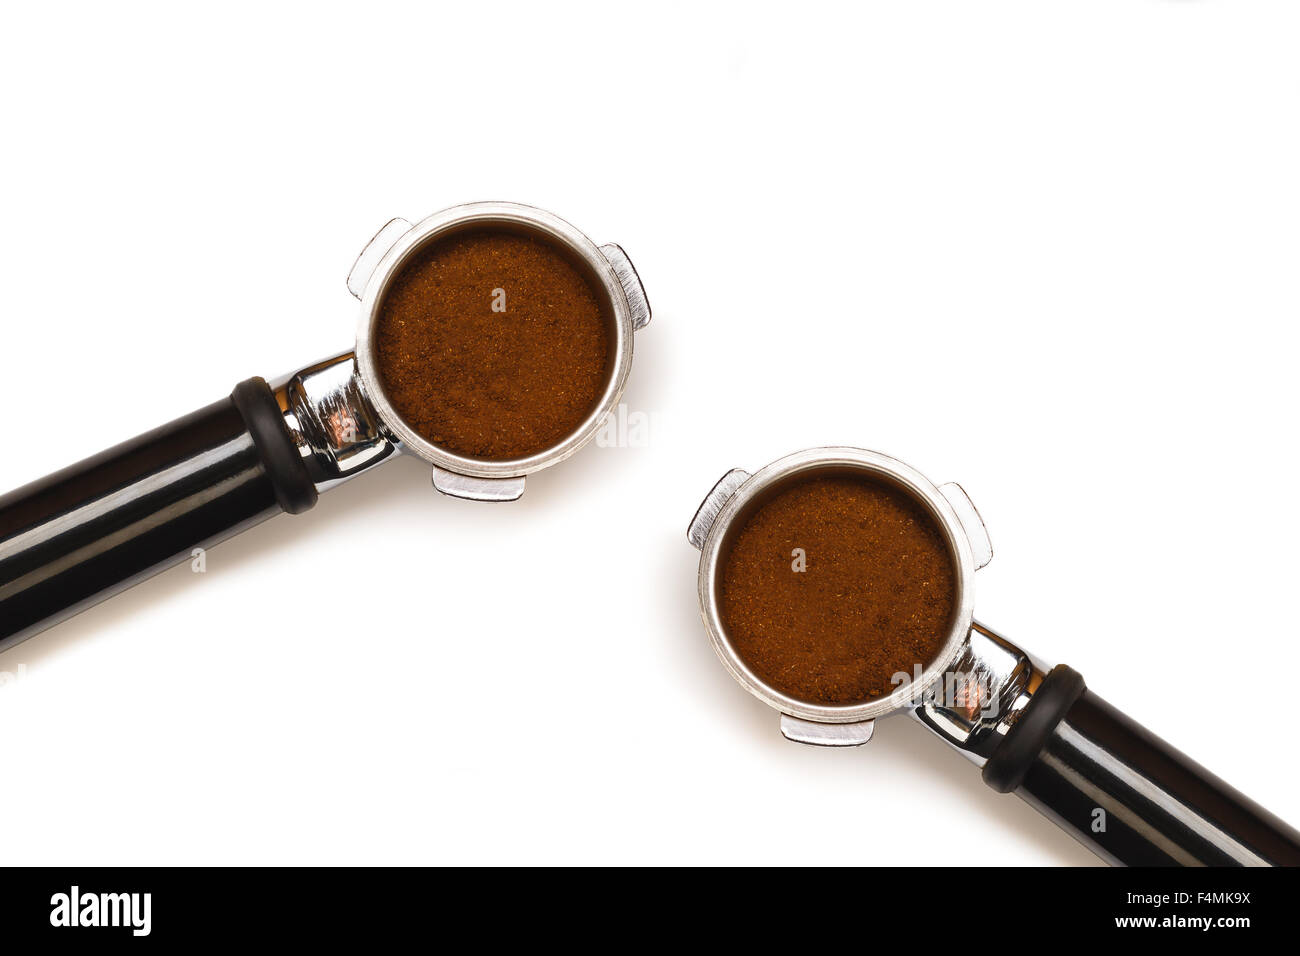 Two italian espresso coffee machine pistons. With ground coffee isolated on white background. Stock Photo